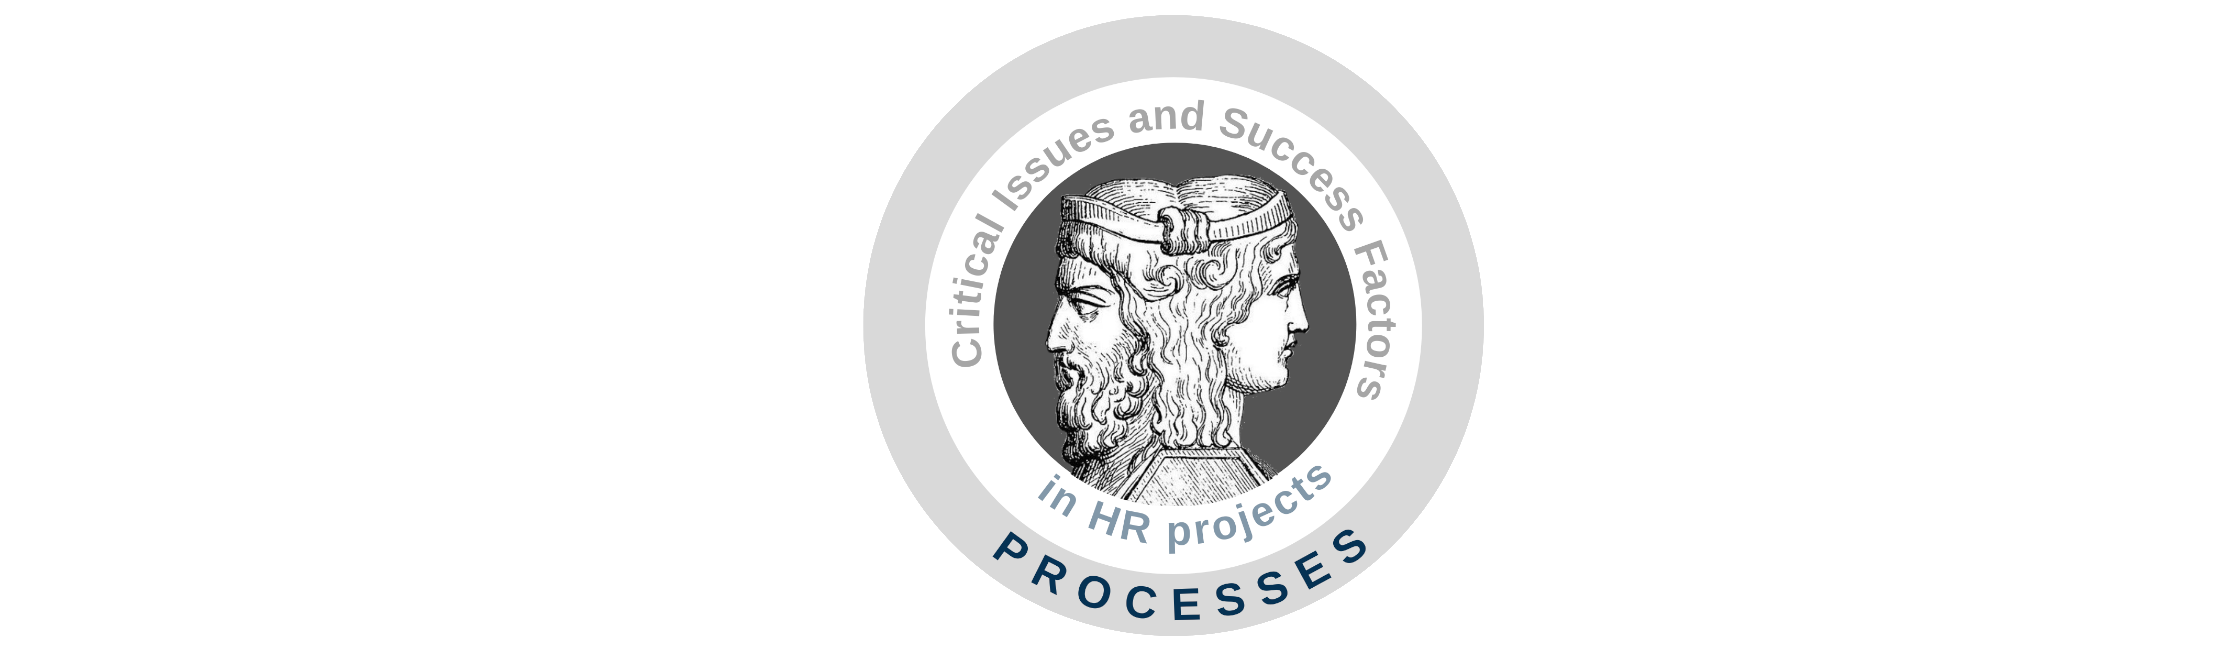 Critical Issues and Success Factors in HR projects: Processes